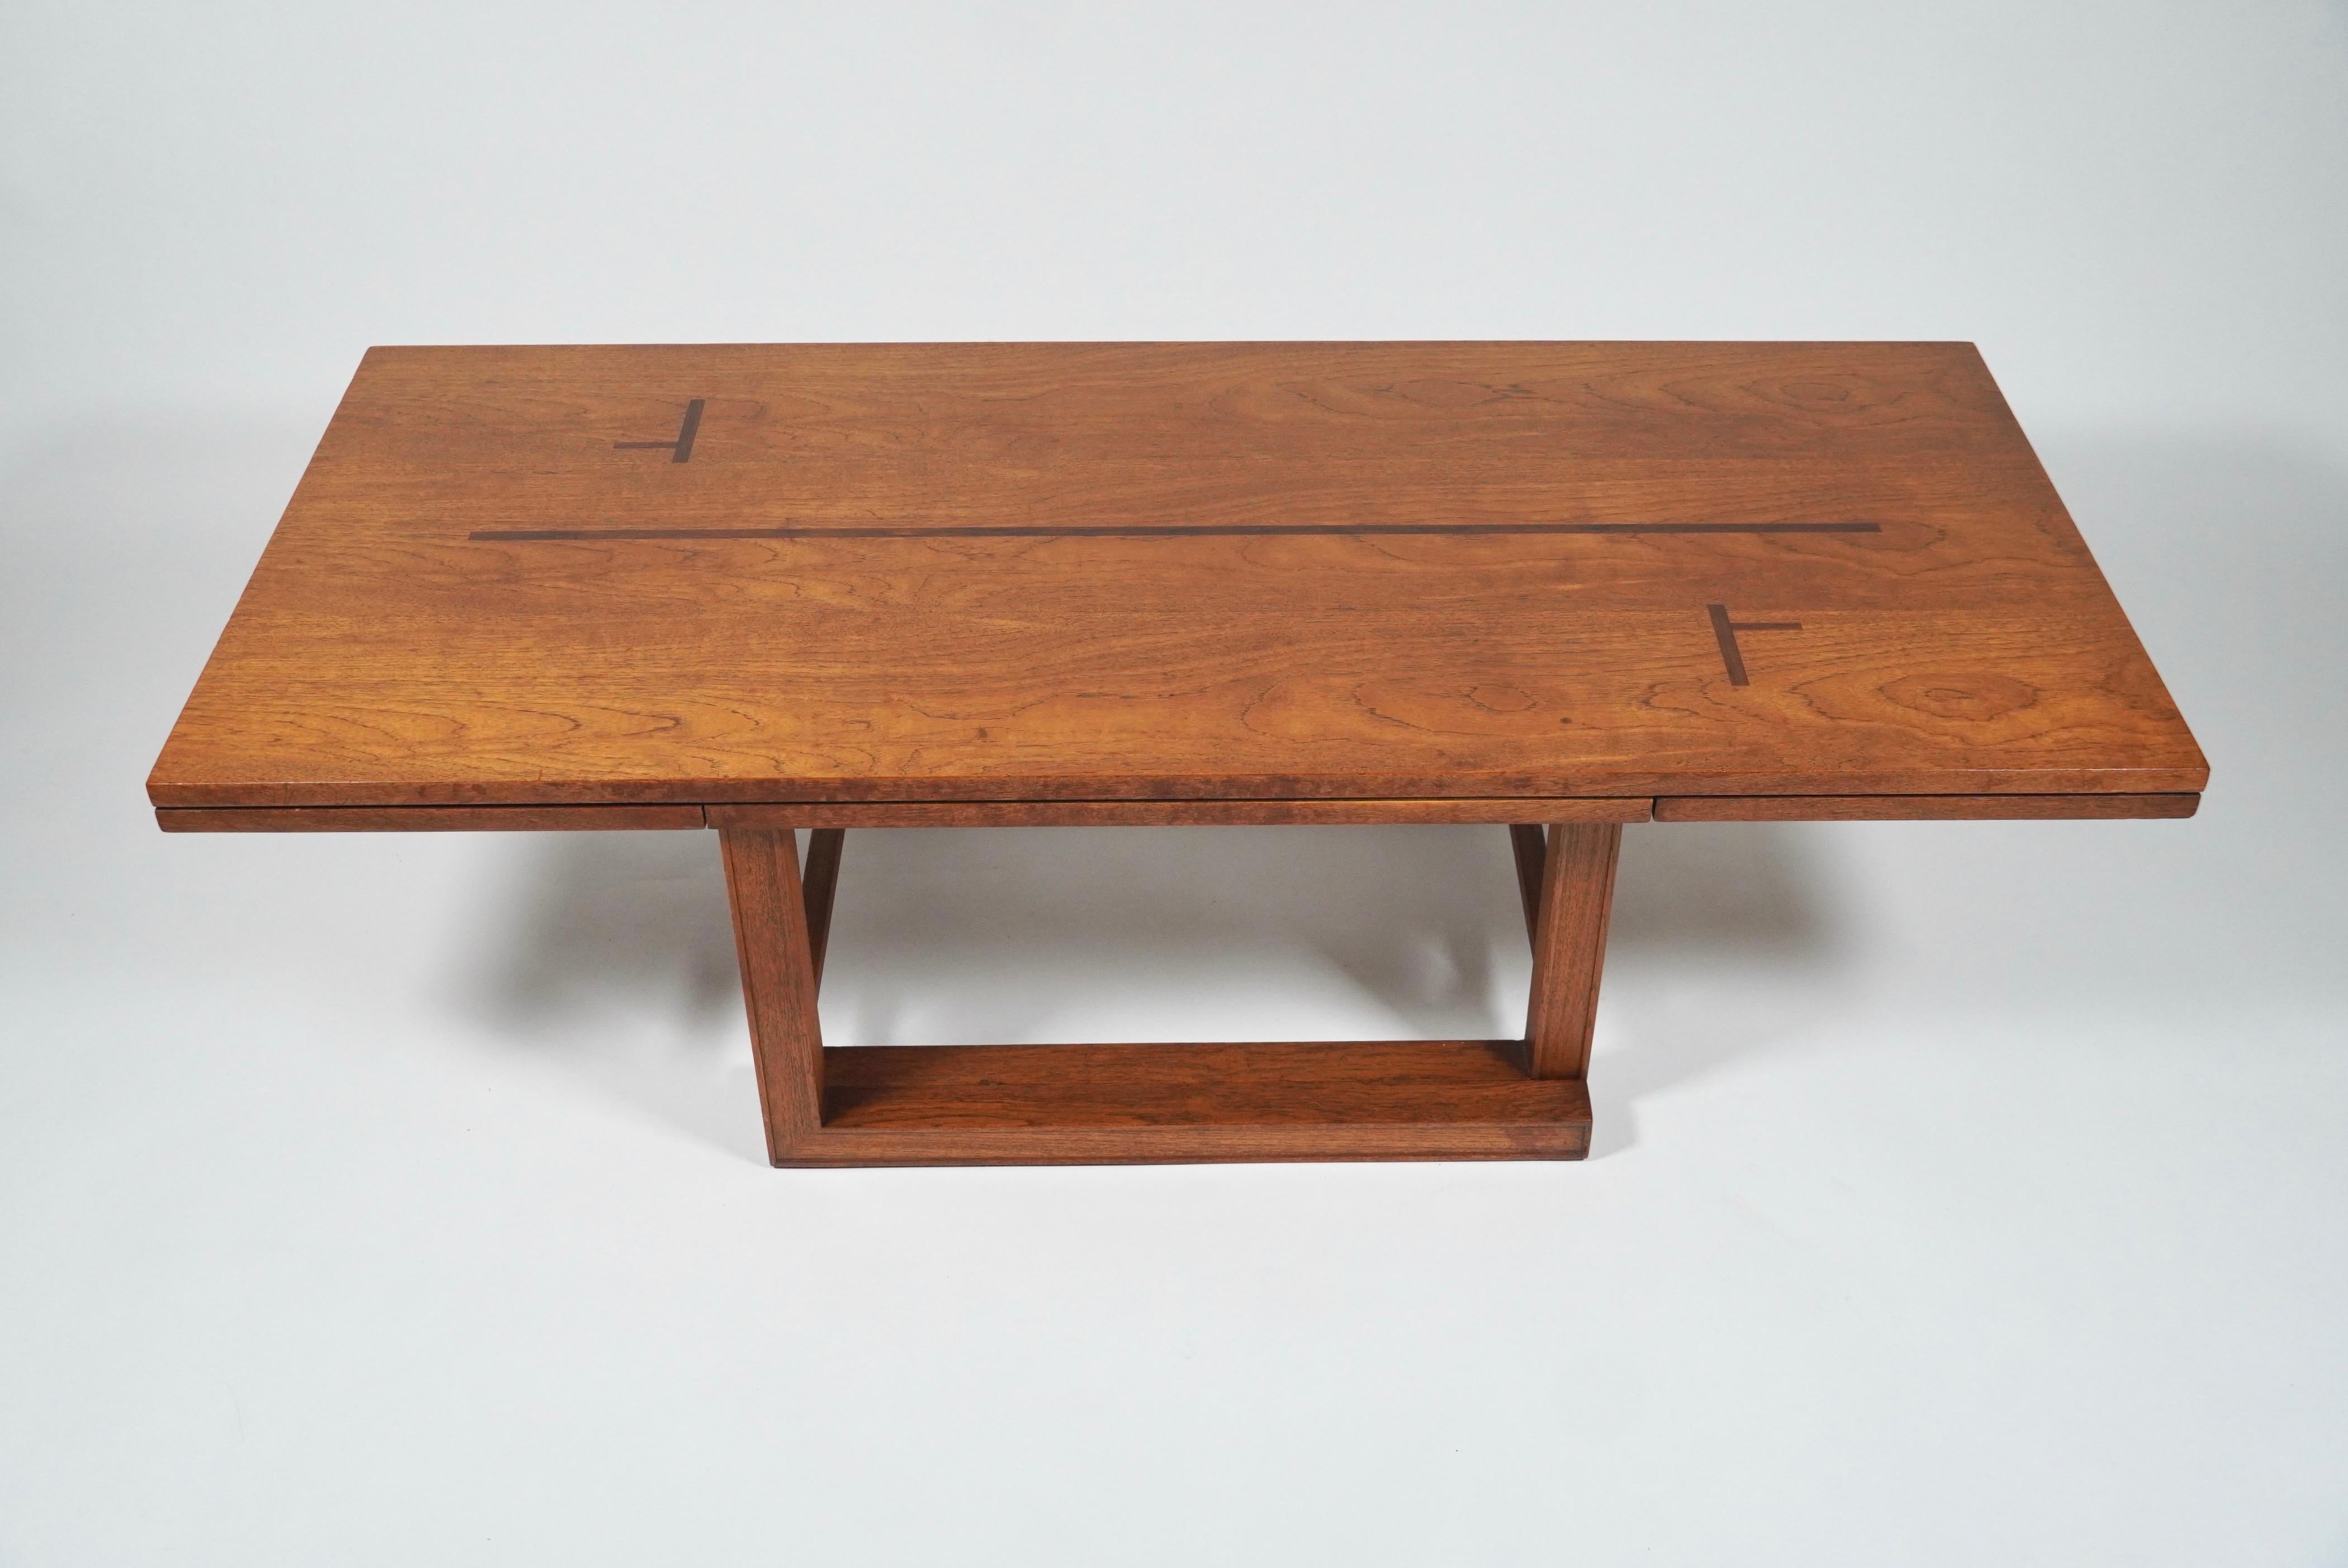 A rare and unusual design by Edward Wormley for Dunbar is this camel leg coffee table that converts into a low console table with drop leaf sides. The top and leafs have an abstract design of inlaid mahogany reminiscent of the Taliesin West School